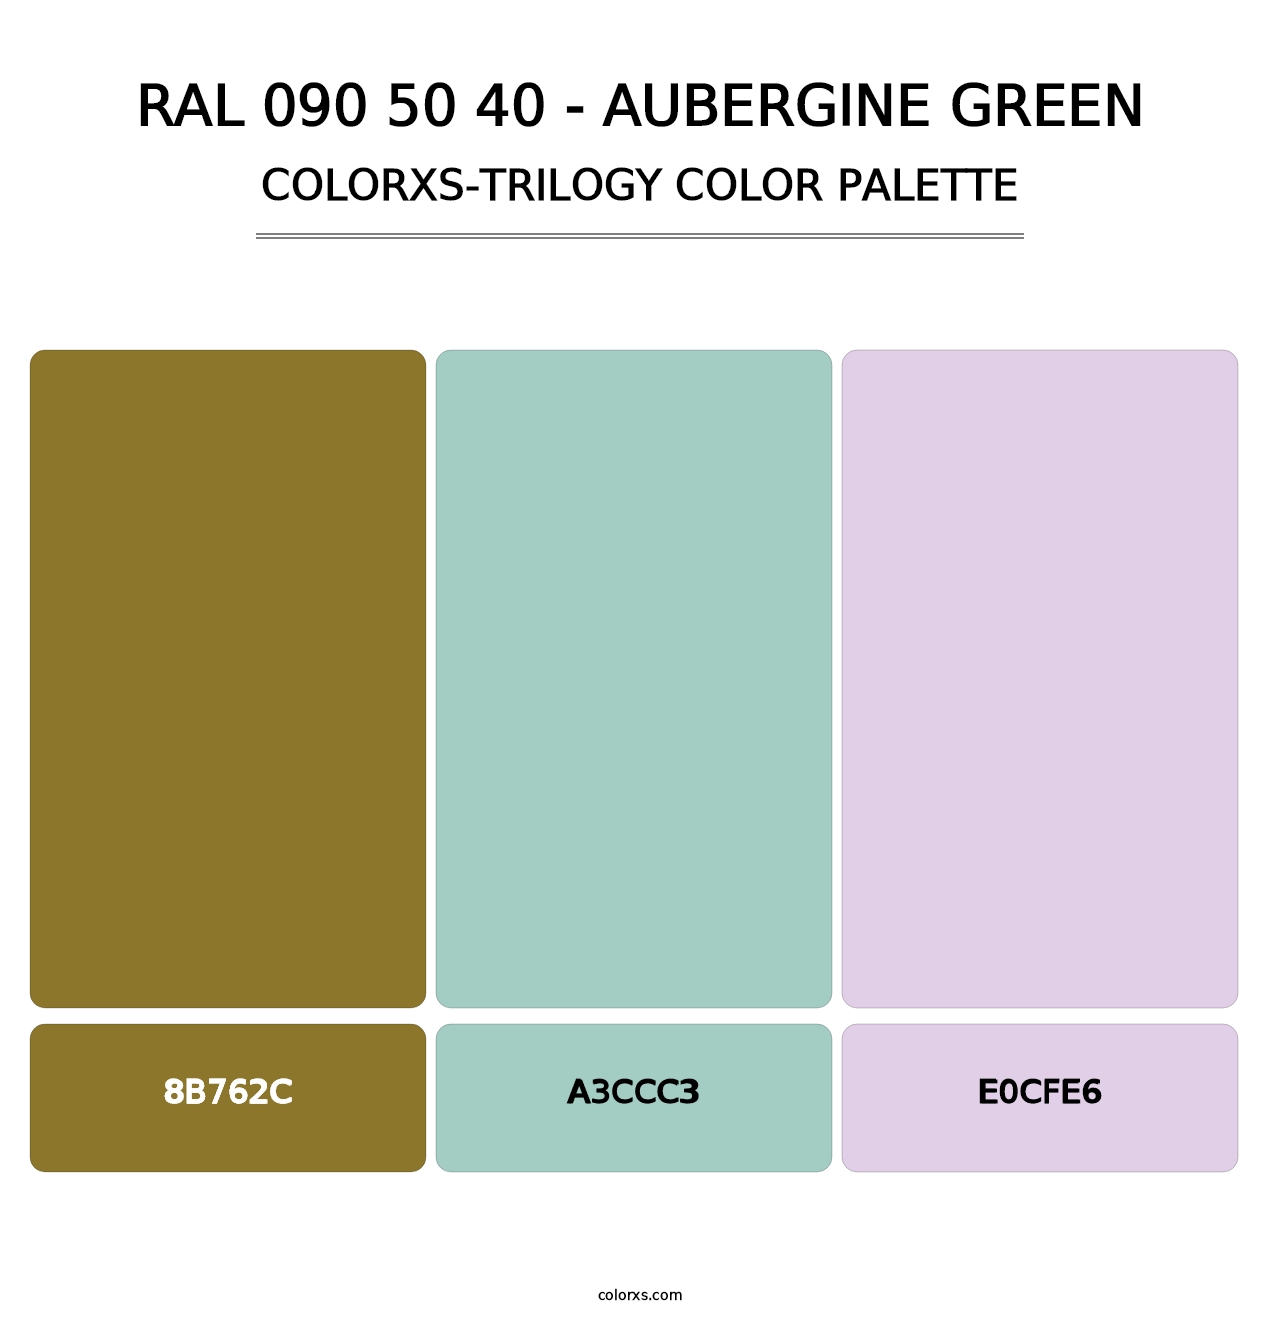 RAL 090 50 40 - Aubergine Green - Colorxs Trilogy Palette